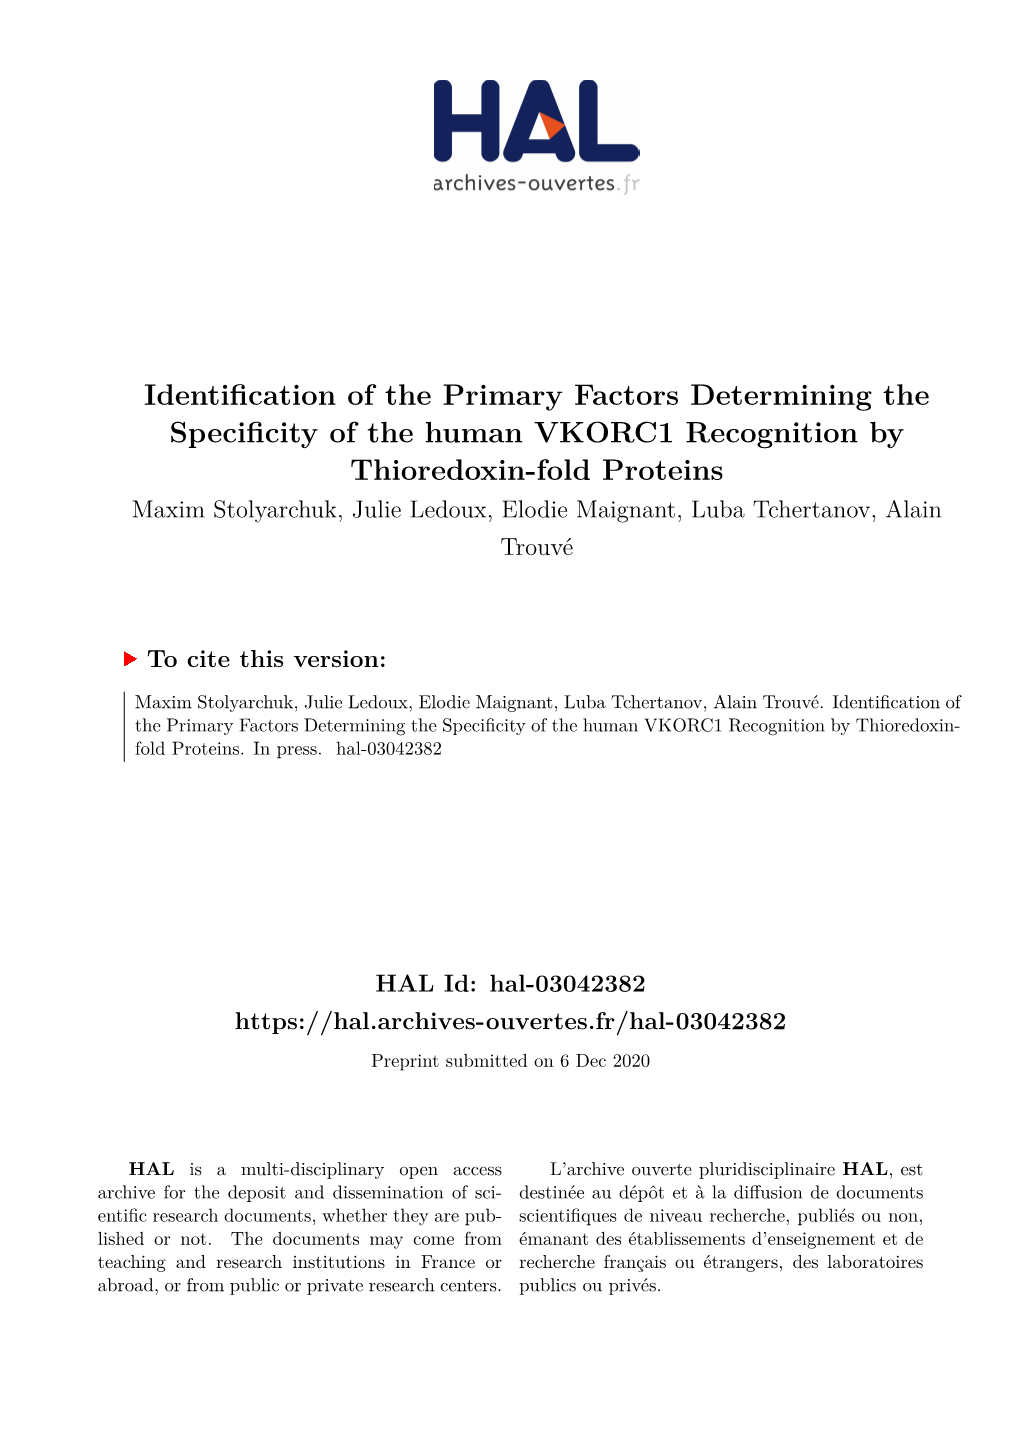 Identification of the Primary Factors Determining the Specificity of The